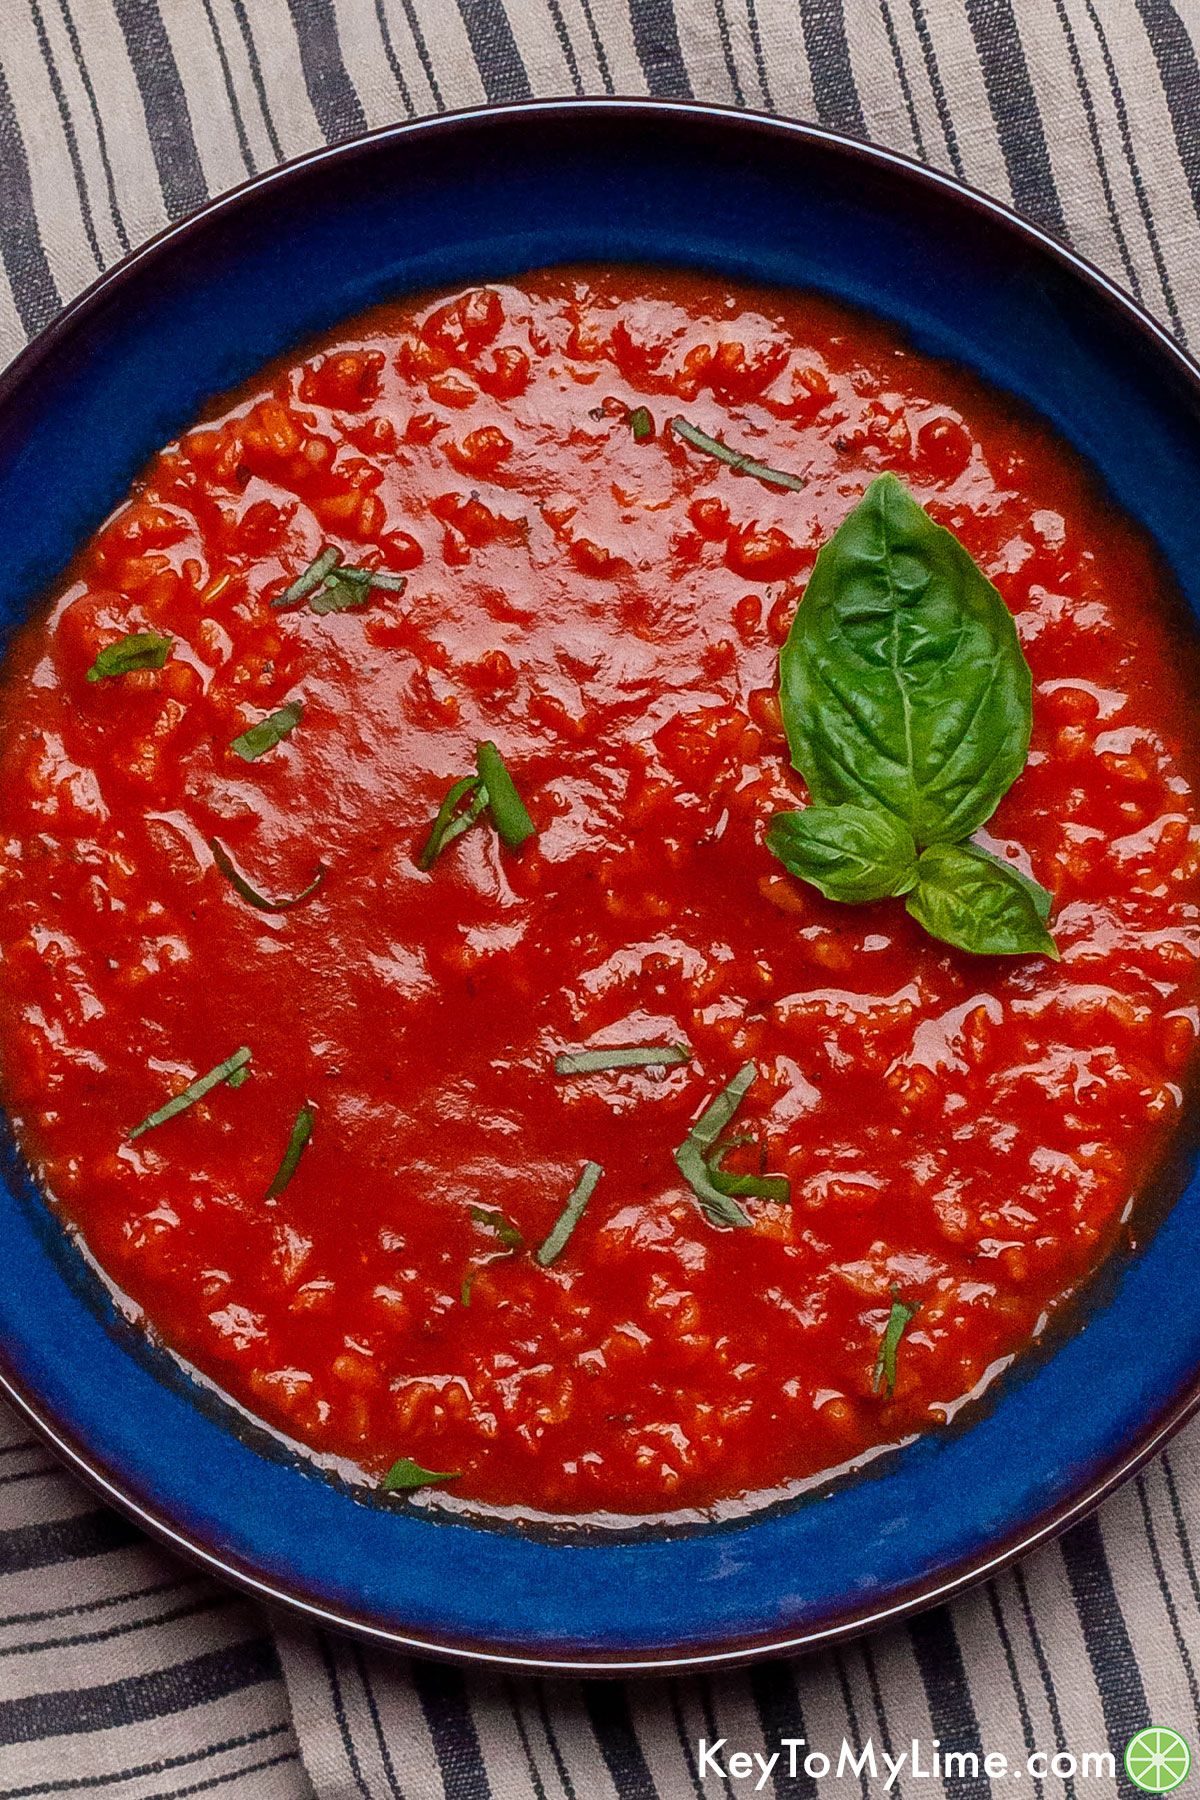 A close up image of a blue bowl filled with tomato rice soup.